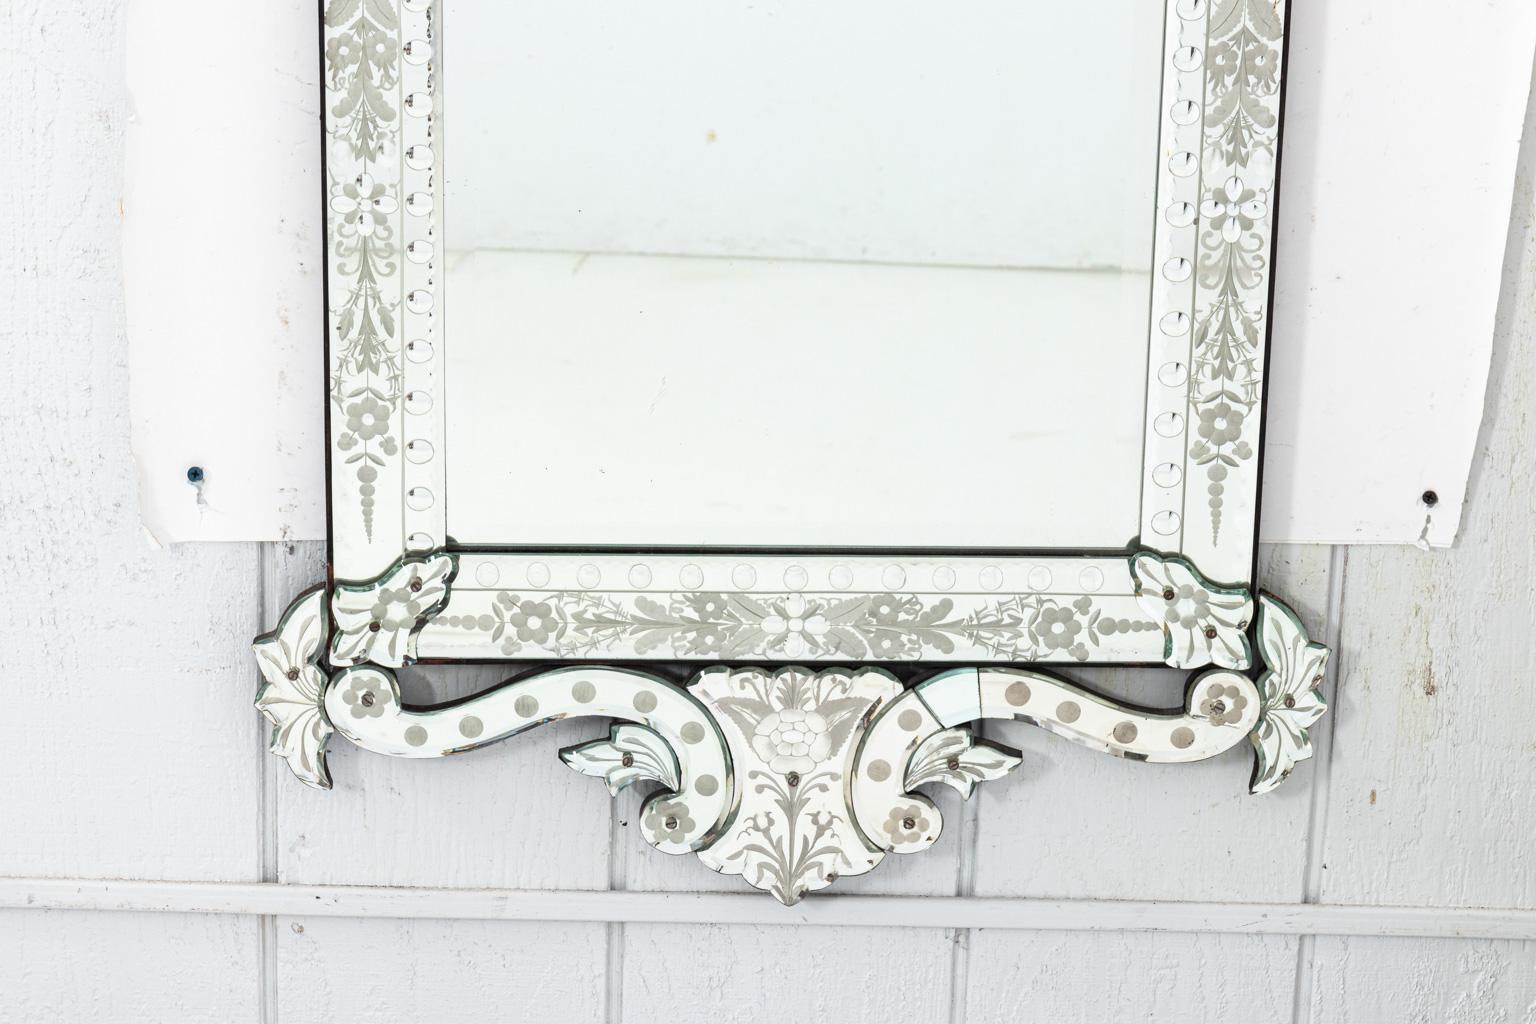 Pair of Venetian mirrors detailed with floral motifs. Please note of wear consistent with age.